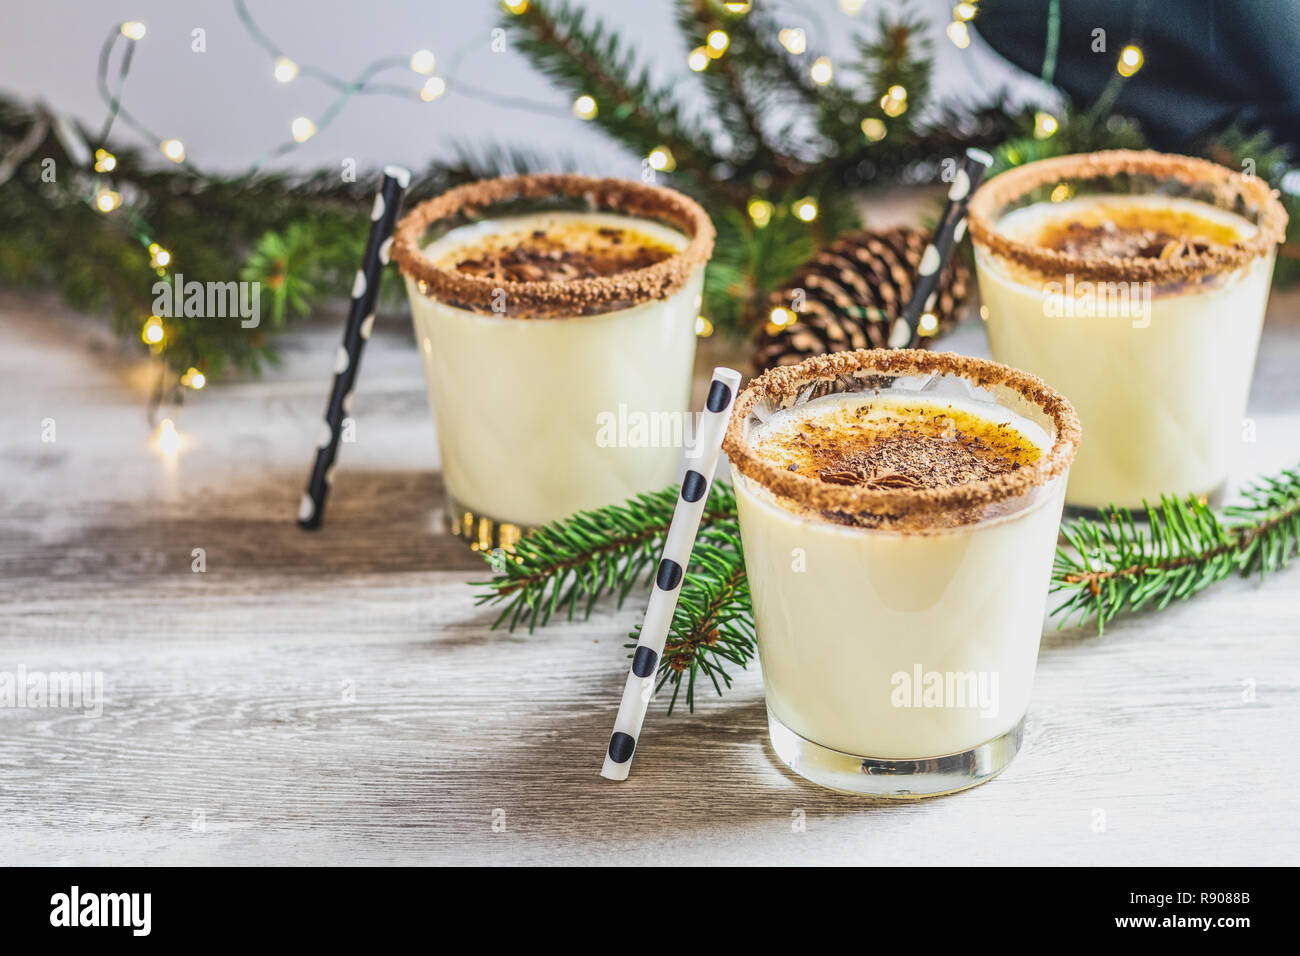 https://c8.alamy.com/comp/R9088B/eggnog-with-cinnamon-and-nutmeg-for-christmas-and-winter-holidays-homemade-eggnog-in-glasses-on-wooden-table-surface-shallow-depth-of-the-field-cop-R9088B.jpg